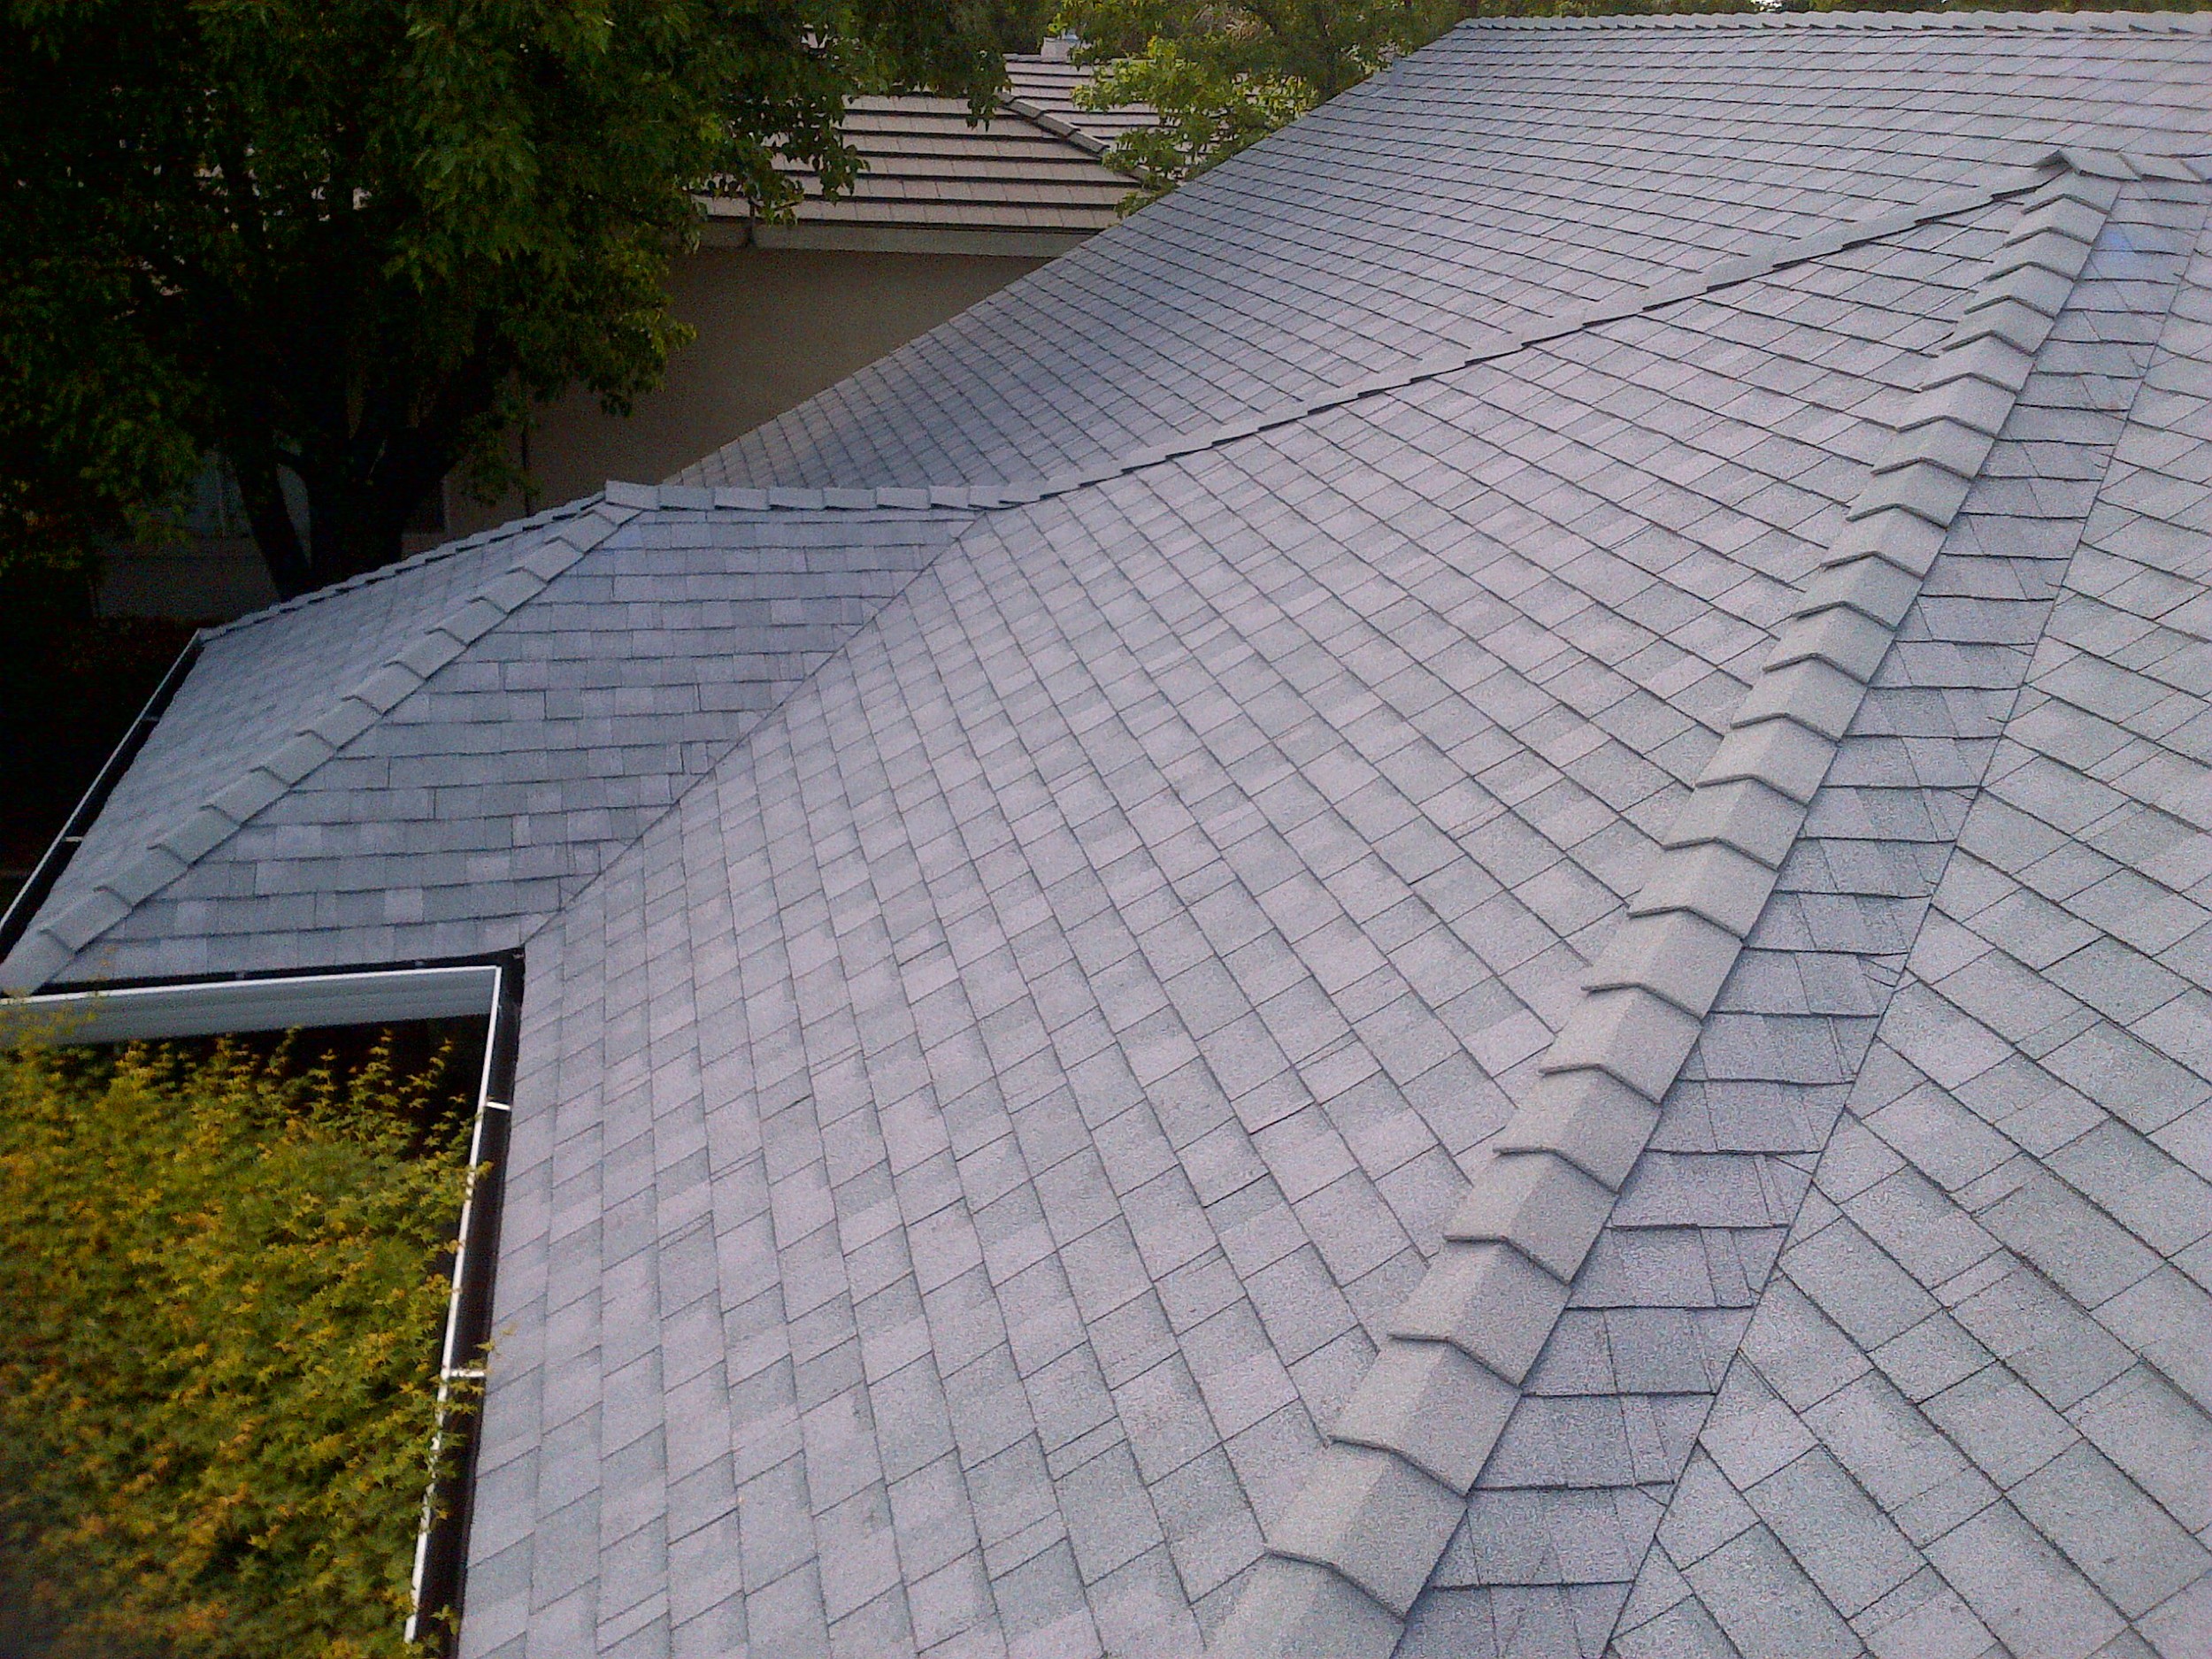 Completed Composition Shingle Roof Project by Ved's Roofing of Yuba City, CA.